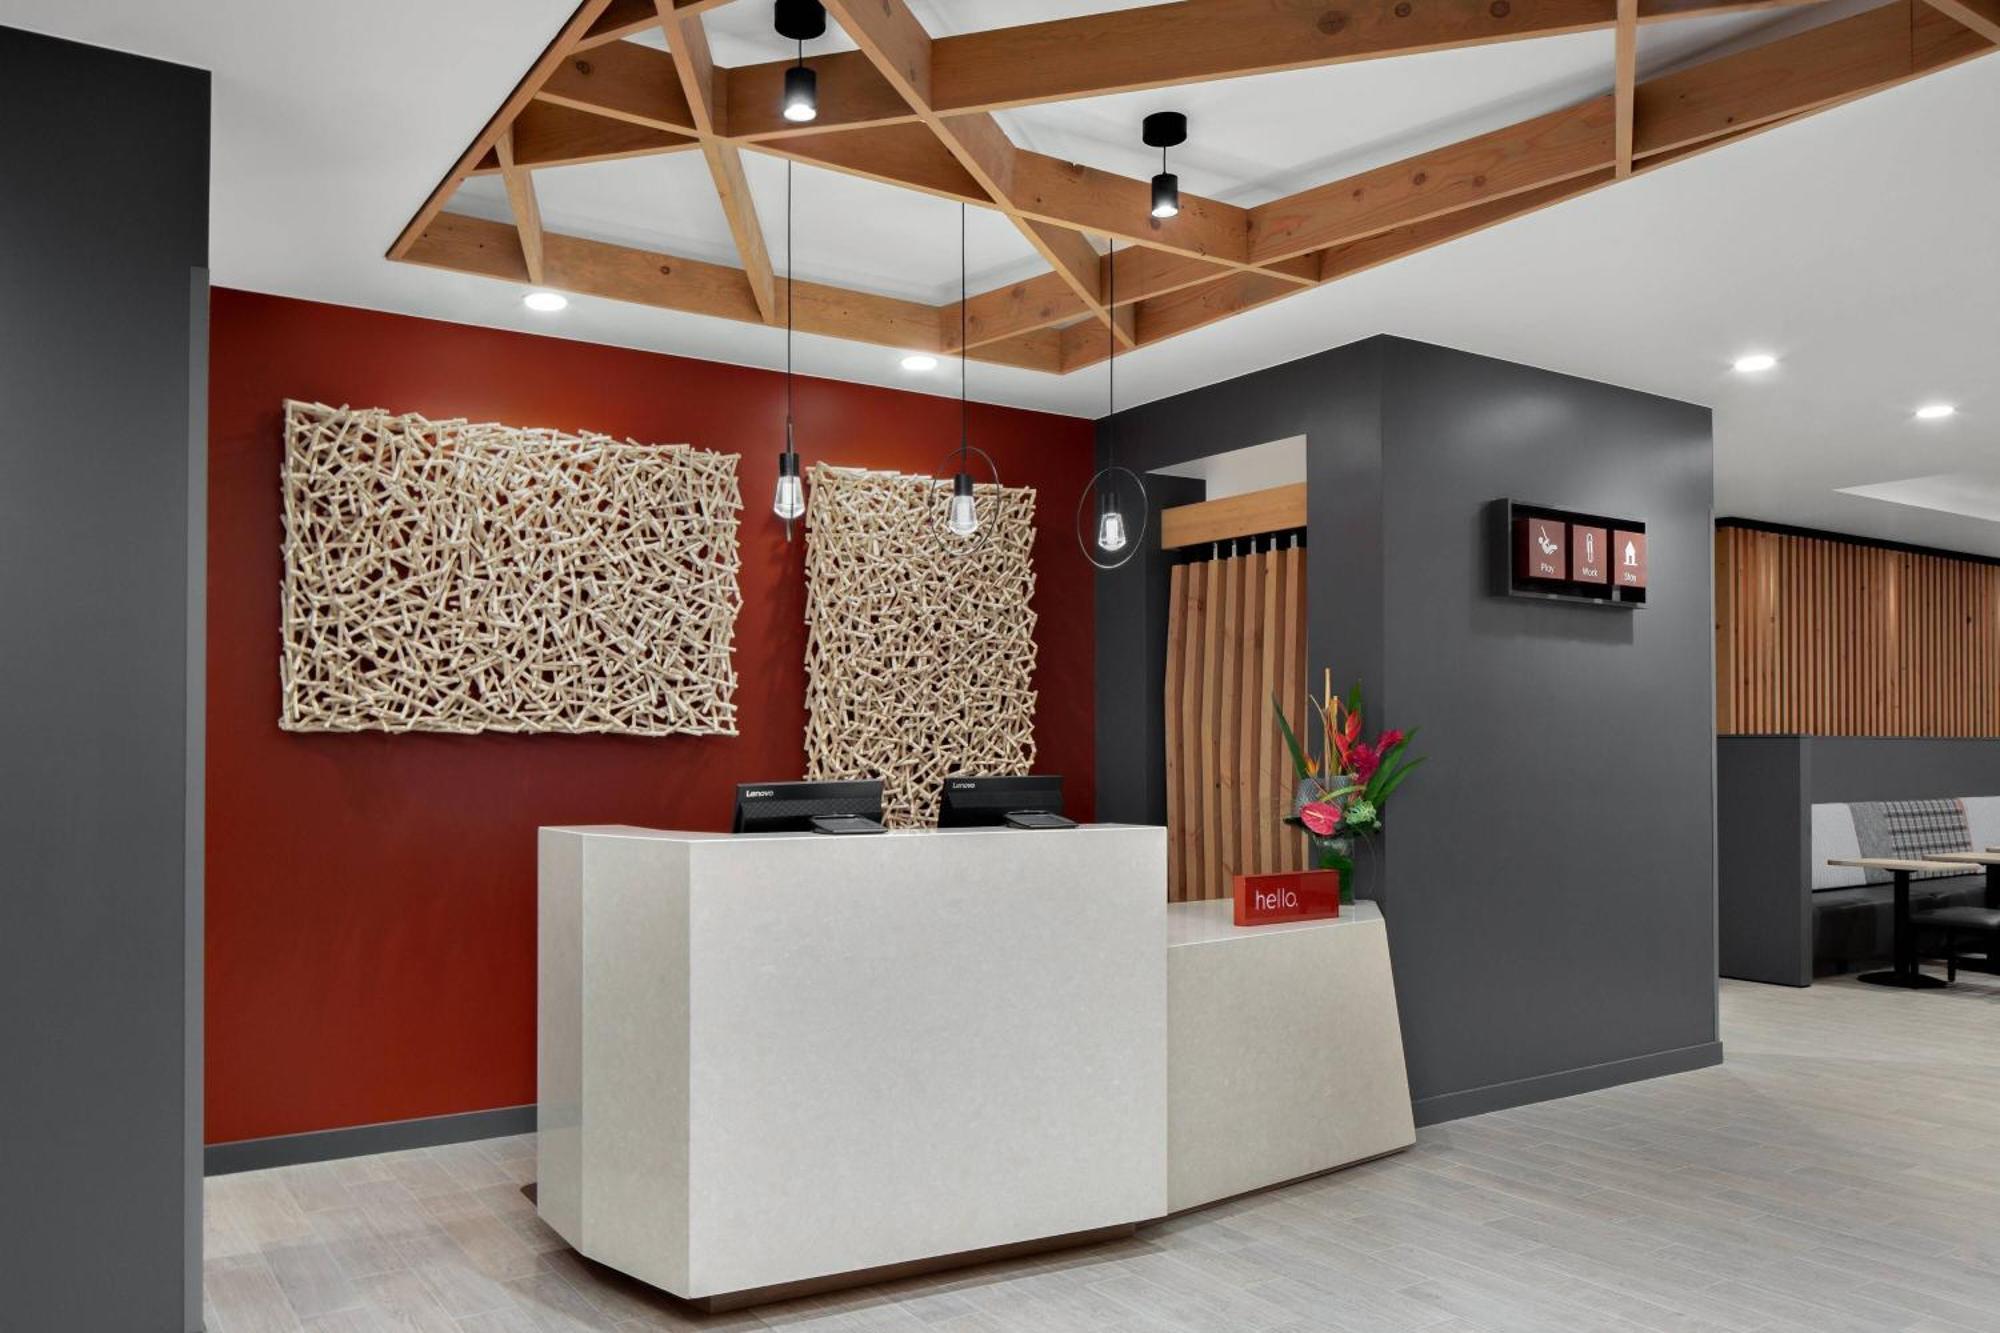 Towneplace Suites By Marriott Loveland Fort Collins Luaran gambar